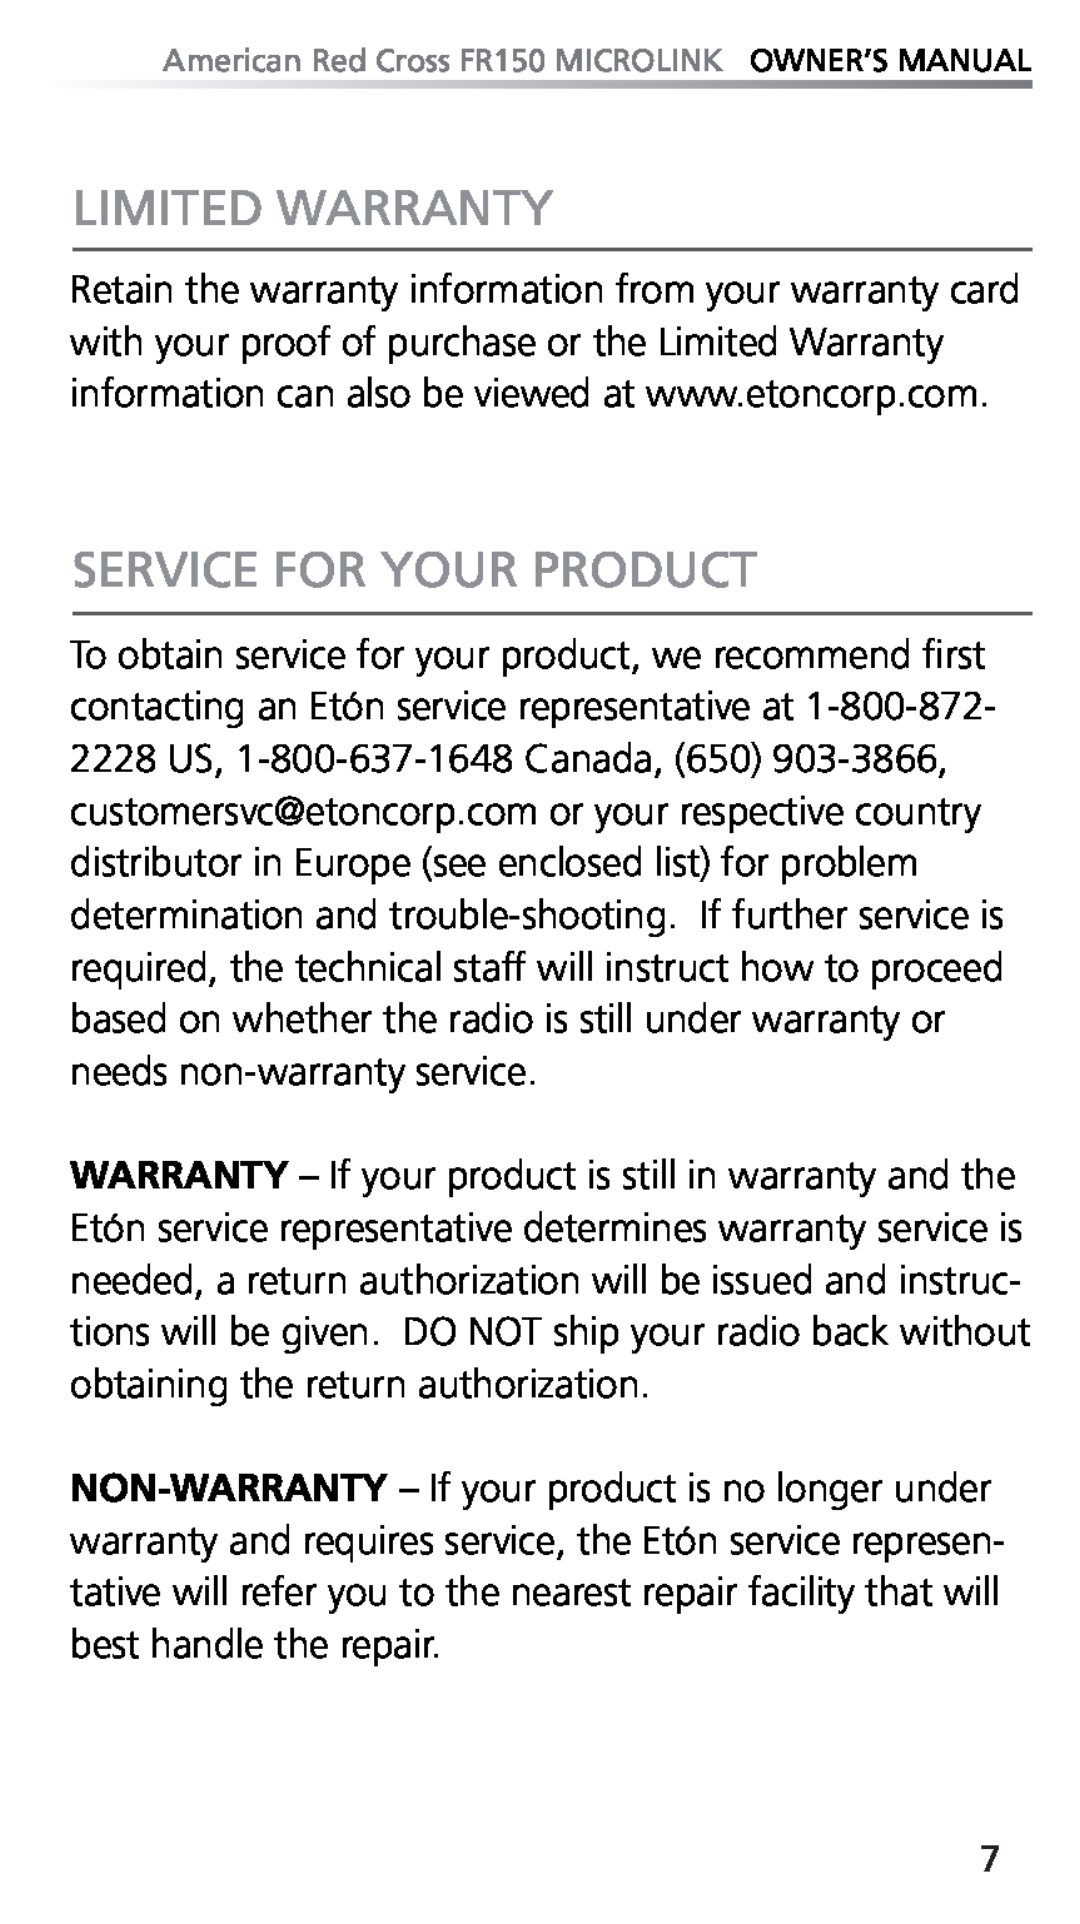 Eton FR150 owner manual Limited Warranty, Service For Your Product 